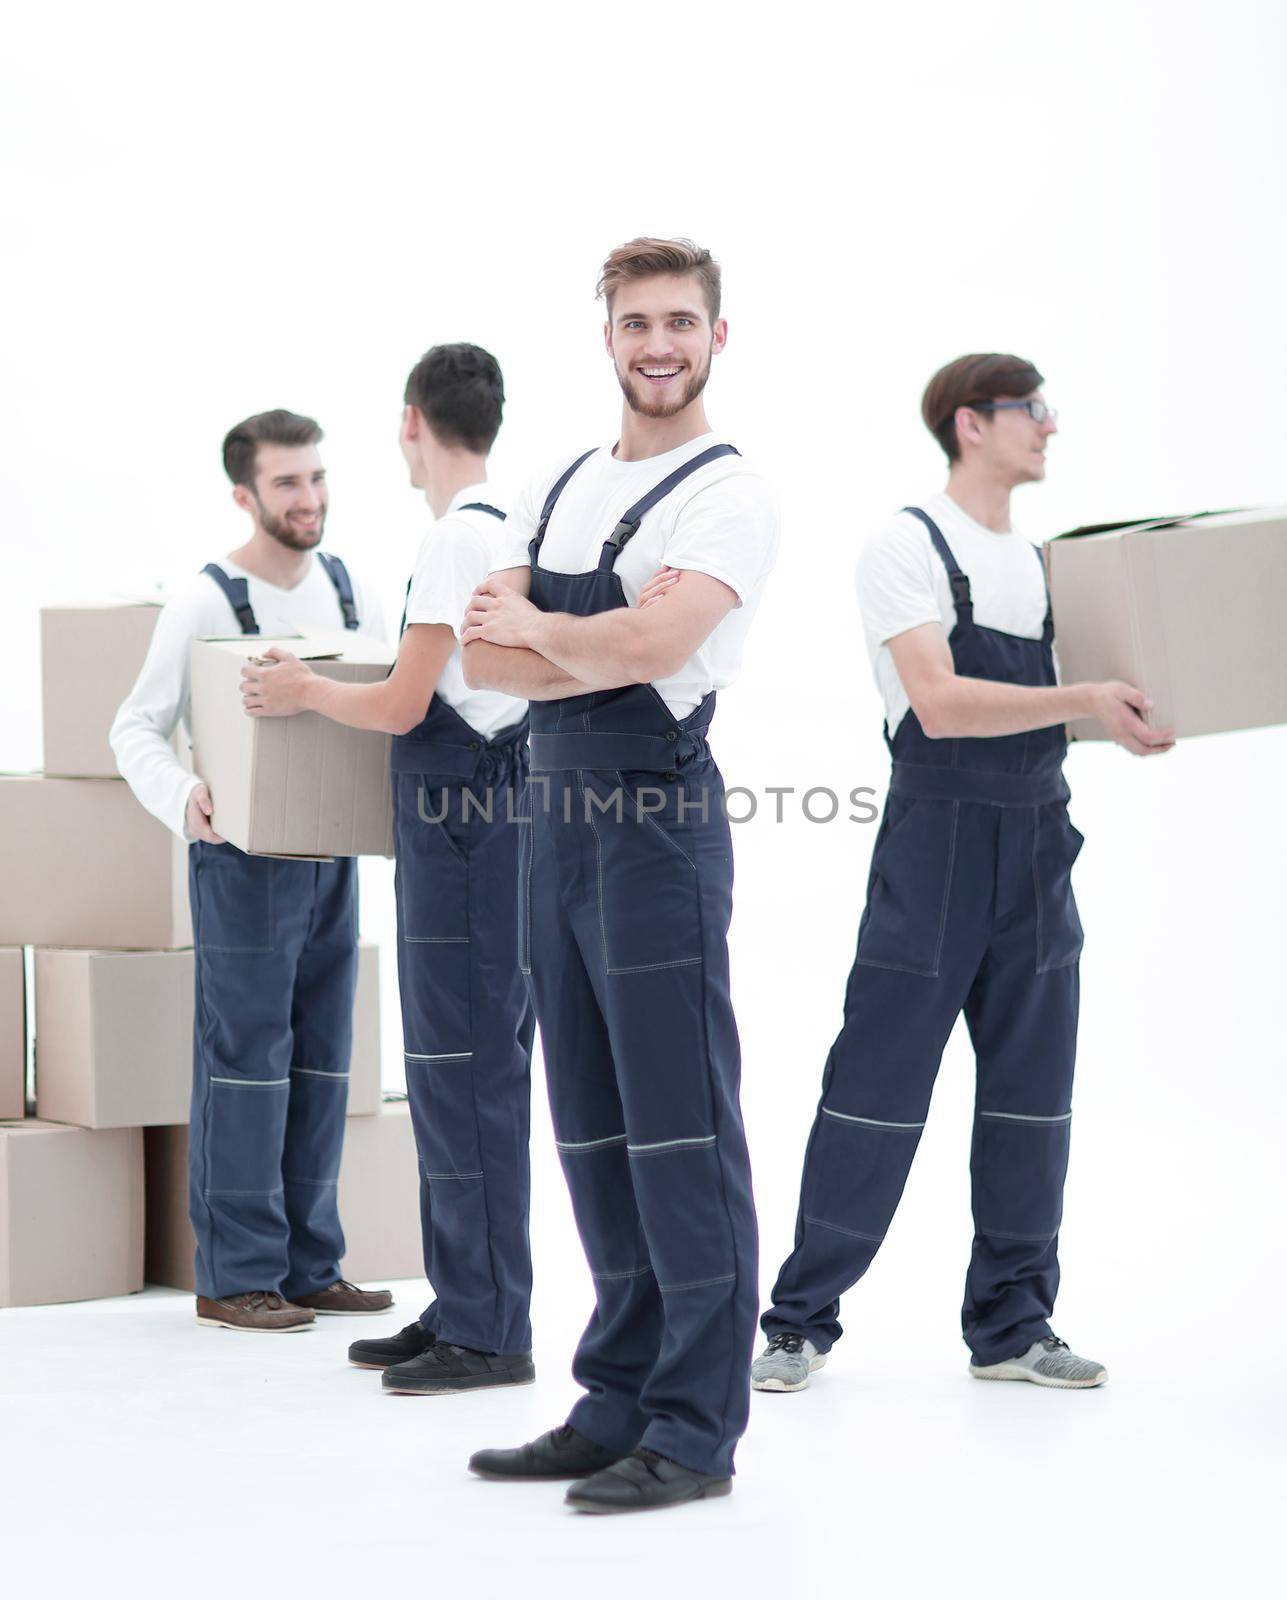 Photo workers pass each other boxes when moving flats.